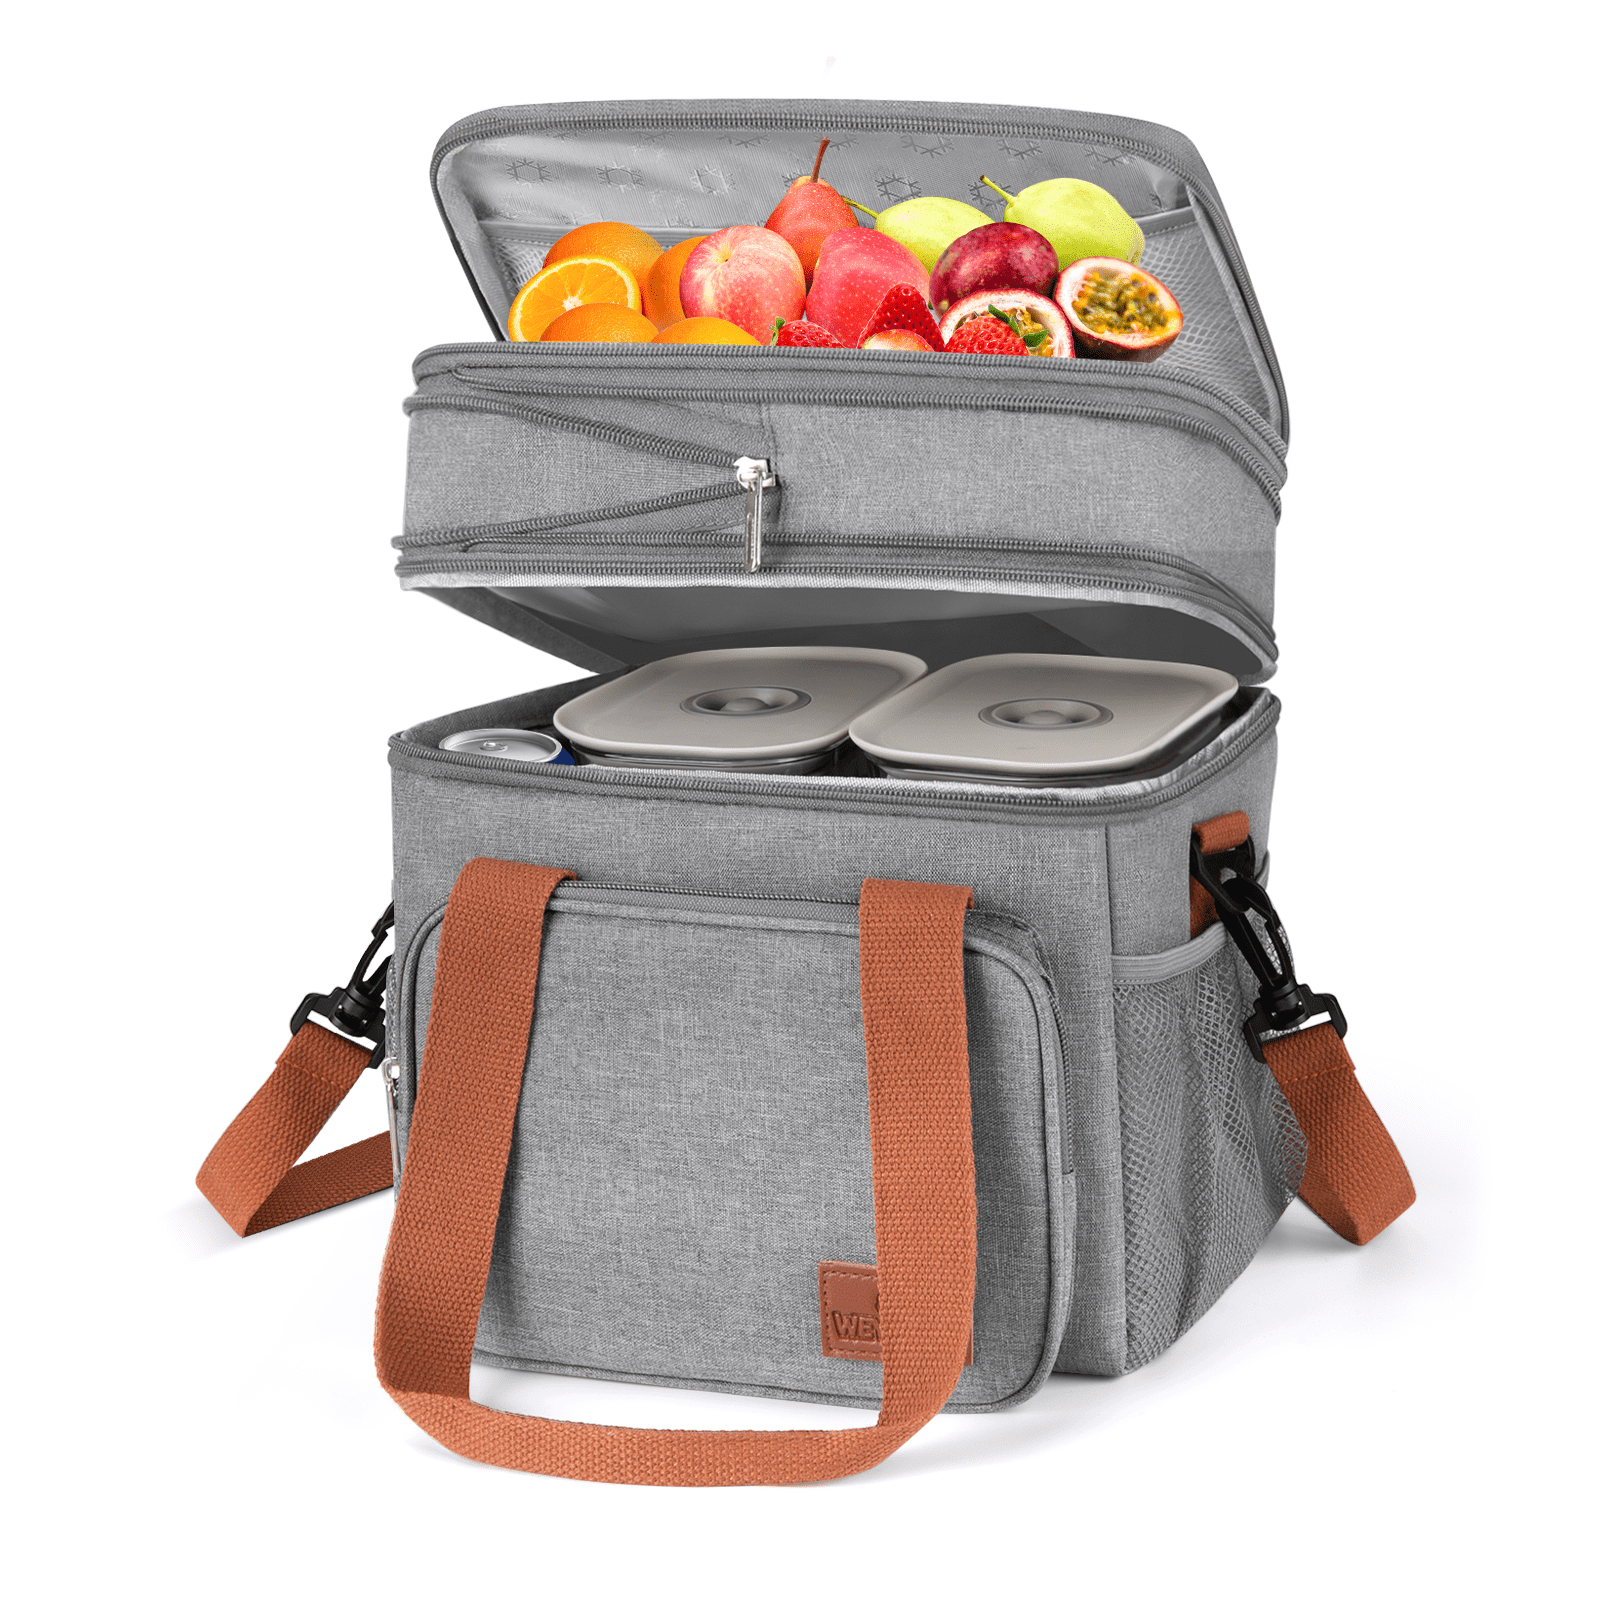 Lunch Bag, Insulated Tote Lunch Box Bags, Reusable Leakproof Lunch Container for Women, Men, Kid, Freezable Food Carries for Office School Picnic